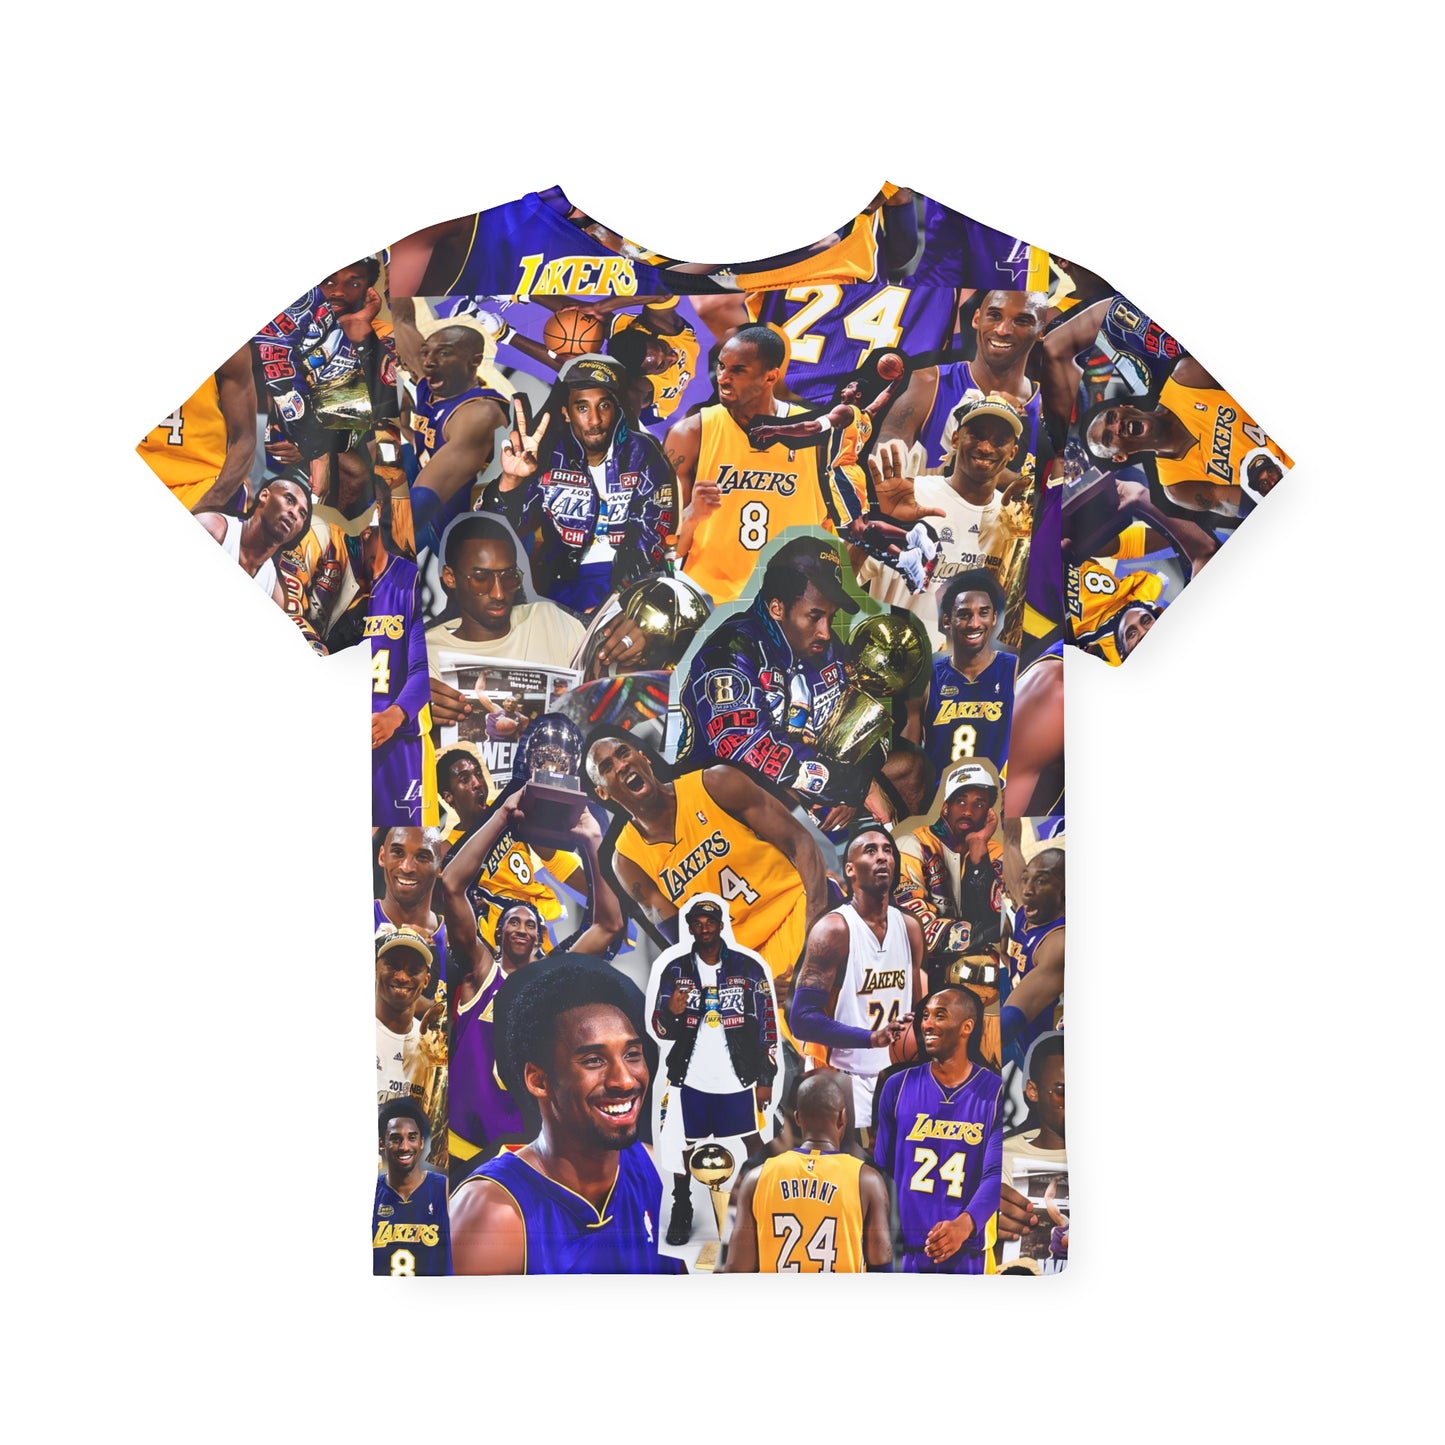 Kobe Bryant Career Moments Photo Collage Kids Sports Jersey